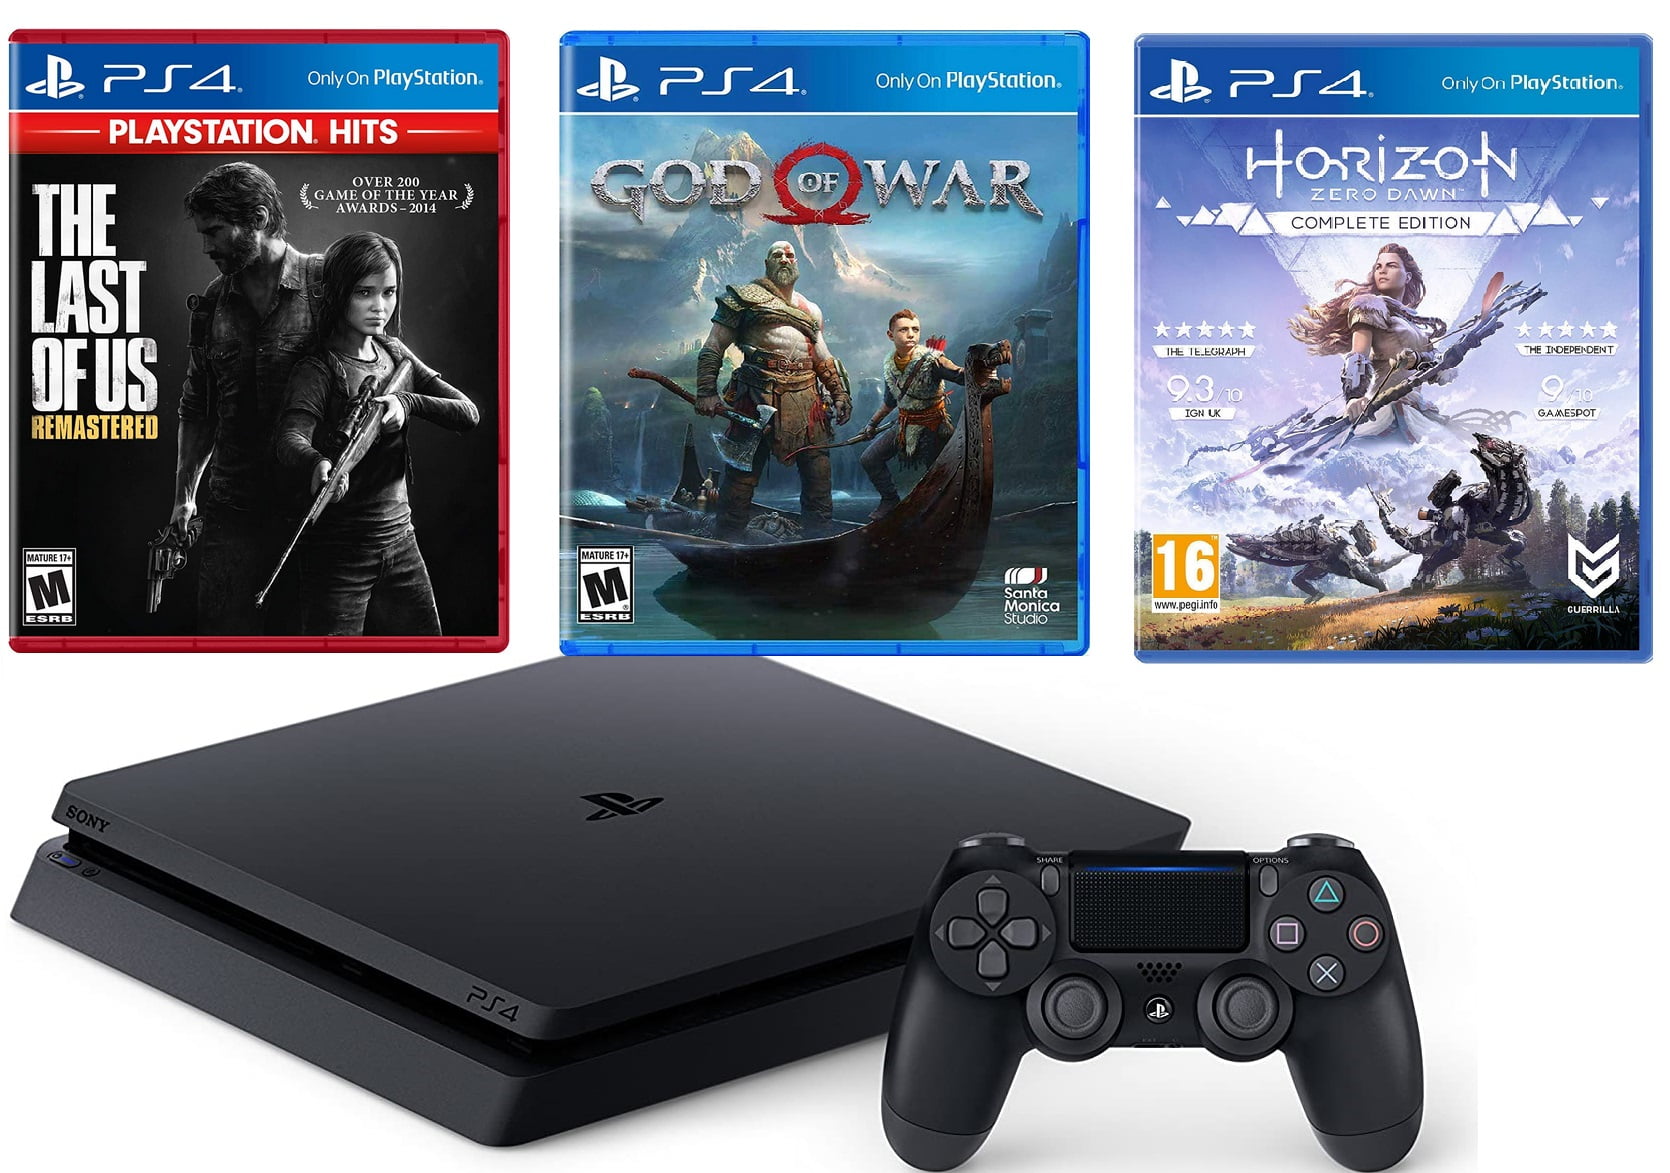 Perforering Imidlertid svimmelhed TEC Sony PlayStation 4 (PS4) Slim 1TB Ultimate holiday Bundle with Three  Games: The Last of Us, God of War, Horizon Zero Dawn - Walmart.com